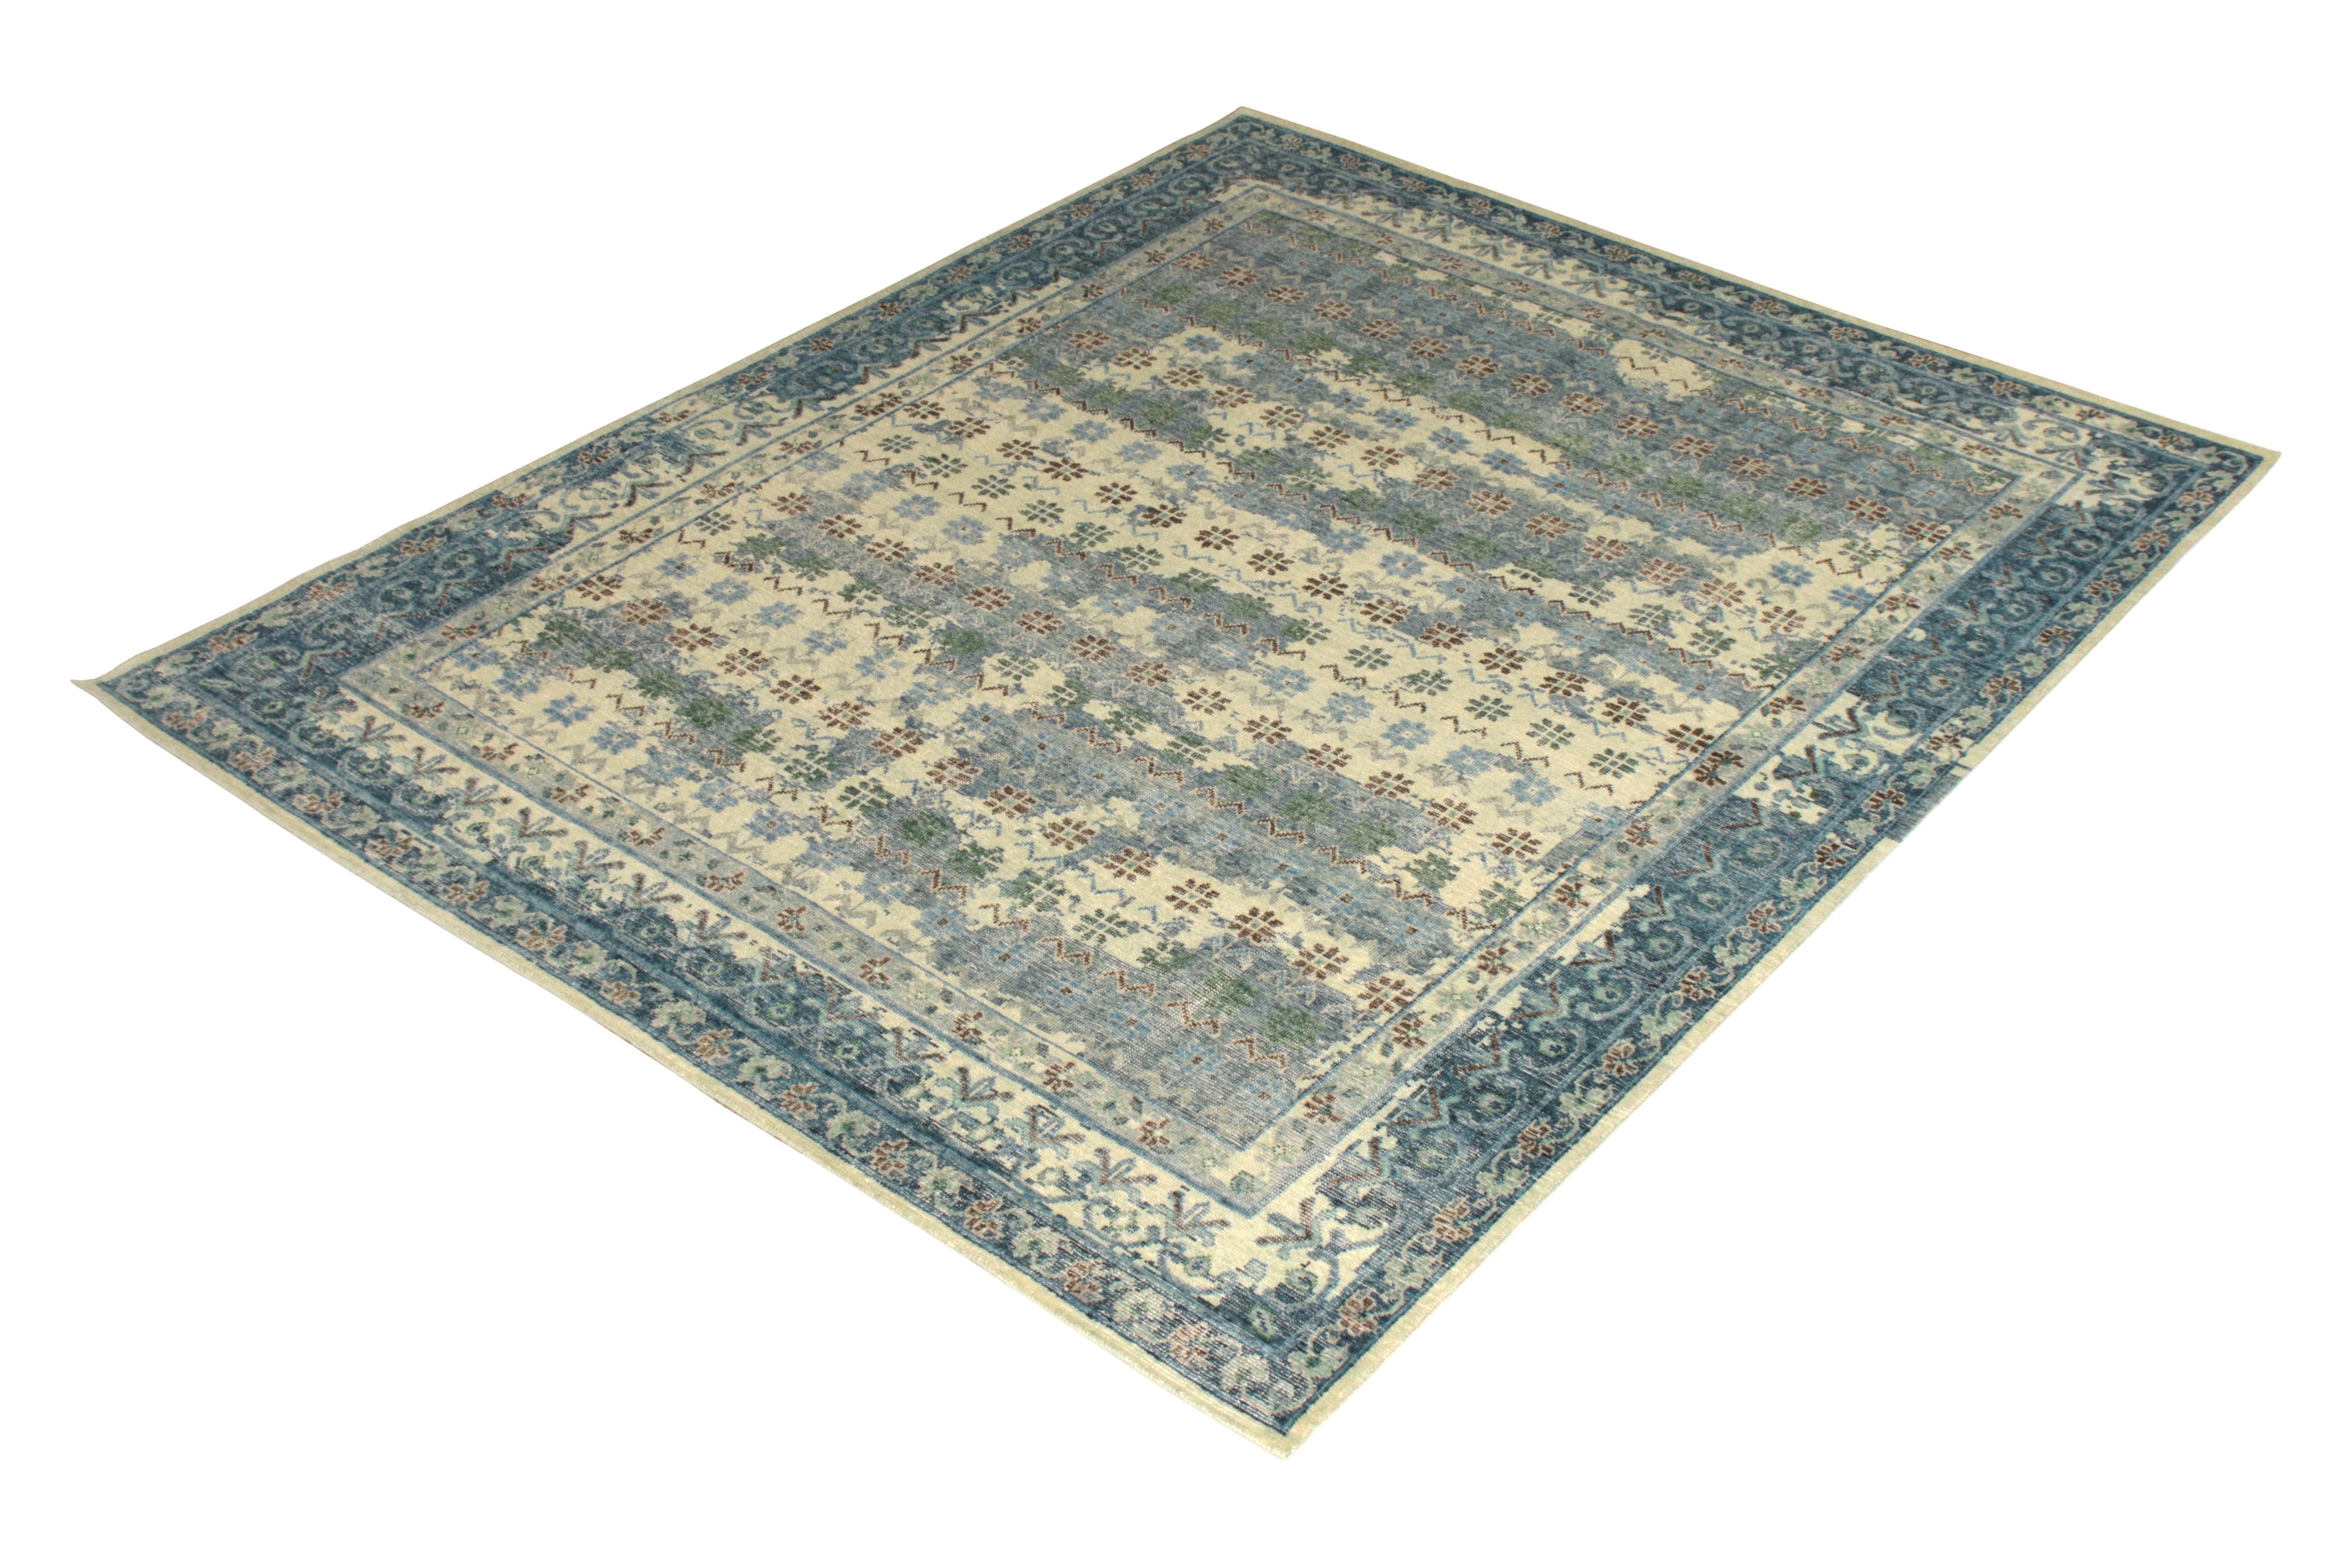 Rustic Rug & Kilim's Hand Knotted Agra Style Rug Beige Brown Distressed Floral Pattern For Sale